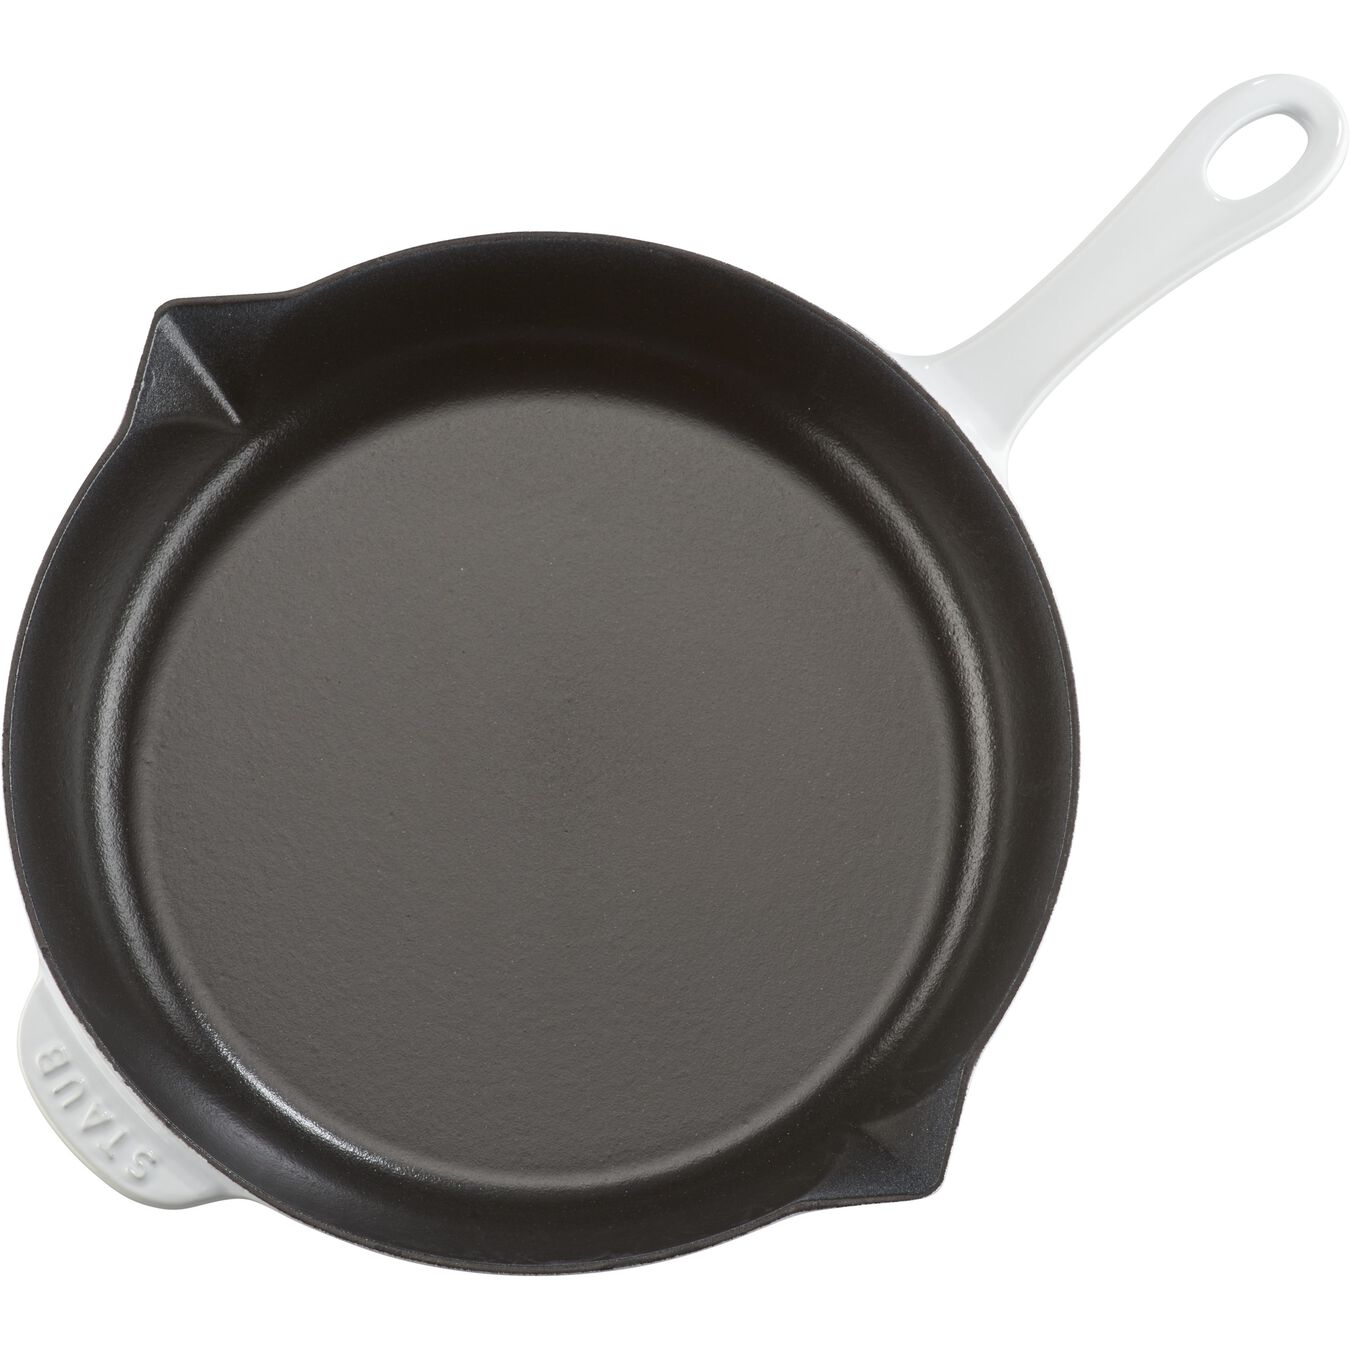 26 cm / 10 inch cast iron Frying pan, pure-white - Visual Imperfections,,large 7